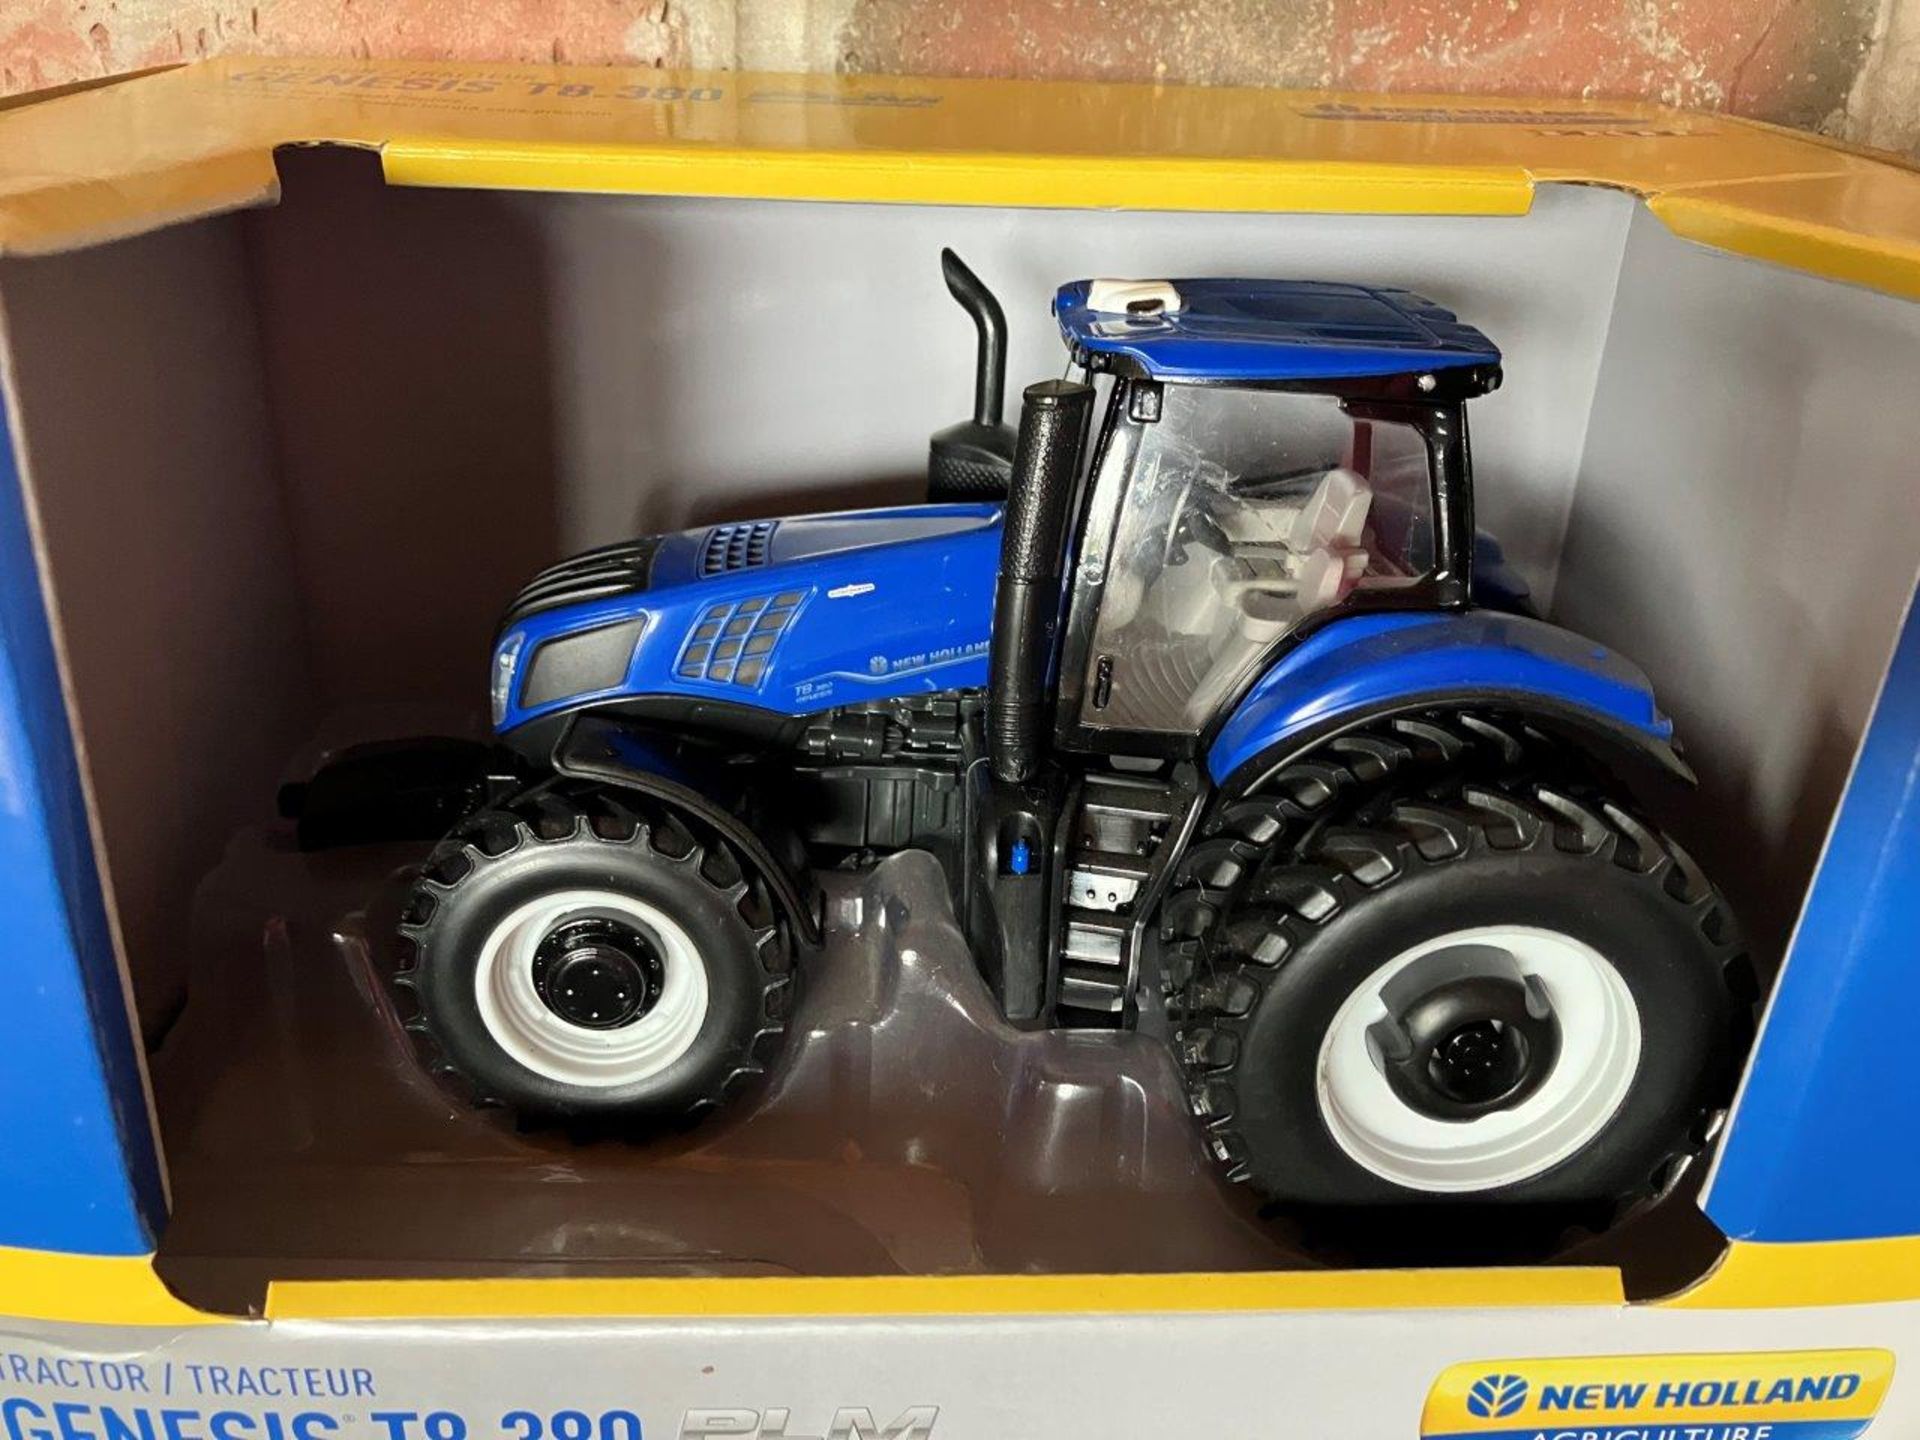 TOMY NEW HOLLAND GENESIS T8.380 DIE- CAST REPLICA TOY TRACTOR - Image 2 of 3